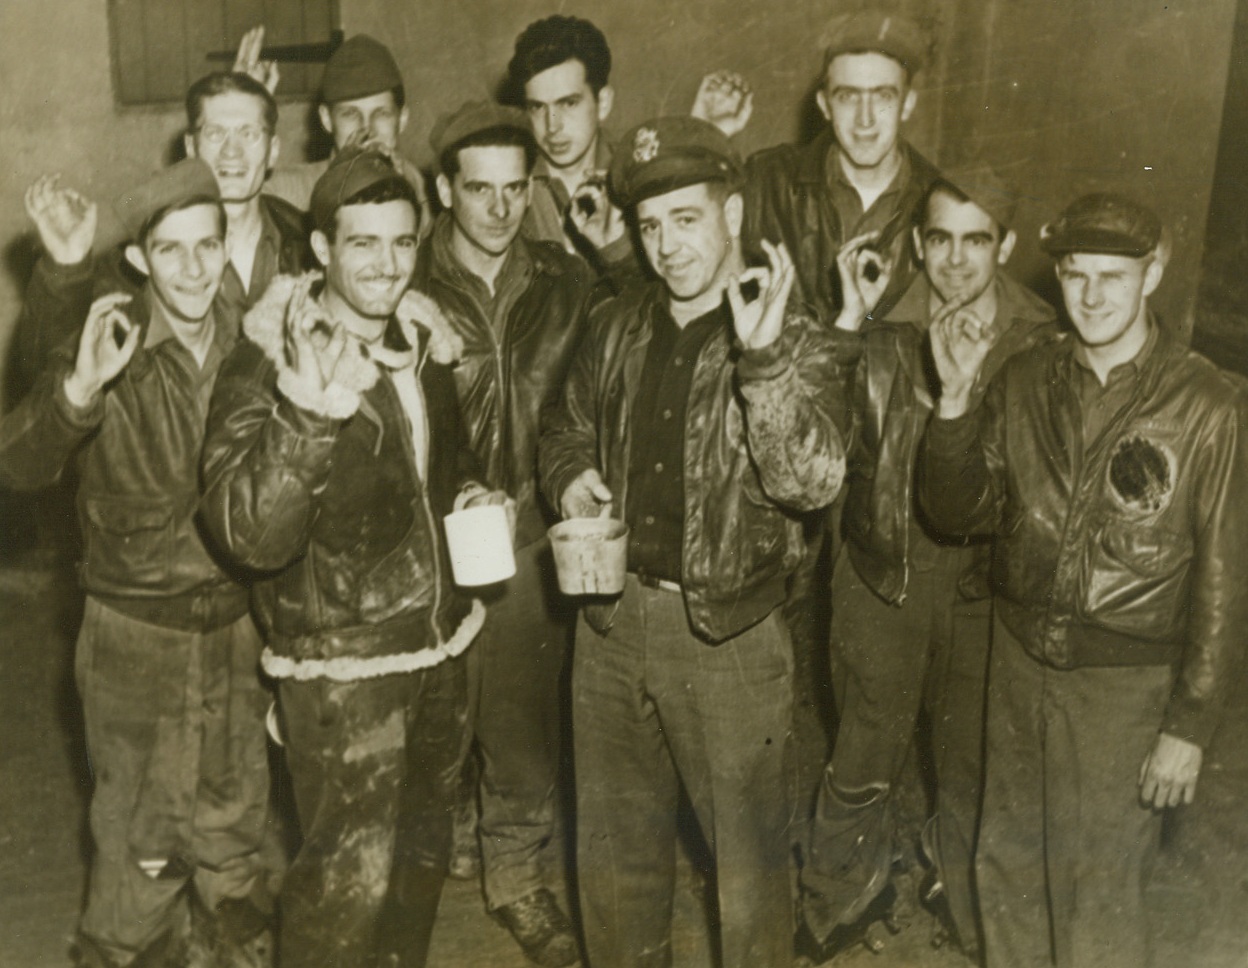 AFTER THEIR 25TH MISSION, 11/16/1943. ENGLAND – The Eight Air Force’s huge daylight raid on Wilhelmshaven marked their 25th raid over Europe for these ten flying Yanks, who are shown celebrating their safe return.  In front (left to right) are two pilots: Captain Sam P. Satariano of Modesto, Calif.; and Lt. Lester L. Barnard of Donna, Texas.  Grouped around the officers are (left to right): T/Sgt. Robert F. Bryson, Stockport, Iowa; Sgt. D.D. Perry, Aberdeen, S.D.; S/Sgt. H.A. Richmond, Fenimore, Wisc.: T/Sgt. George J. Gabriel, Auburn, NY; T/Sgt. H.E. Forrest, Athol, Mass.; S/Sgt. John H. Roth, Jr., Mt. Joy, Pa.; S/Sgt. Phern Stout, Lockwood, Mo.; and S/Sgt. Robert M. Dawson, Detroit, Mich.Credit: Acme;